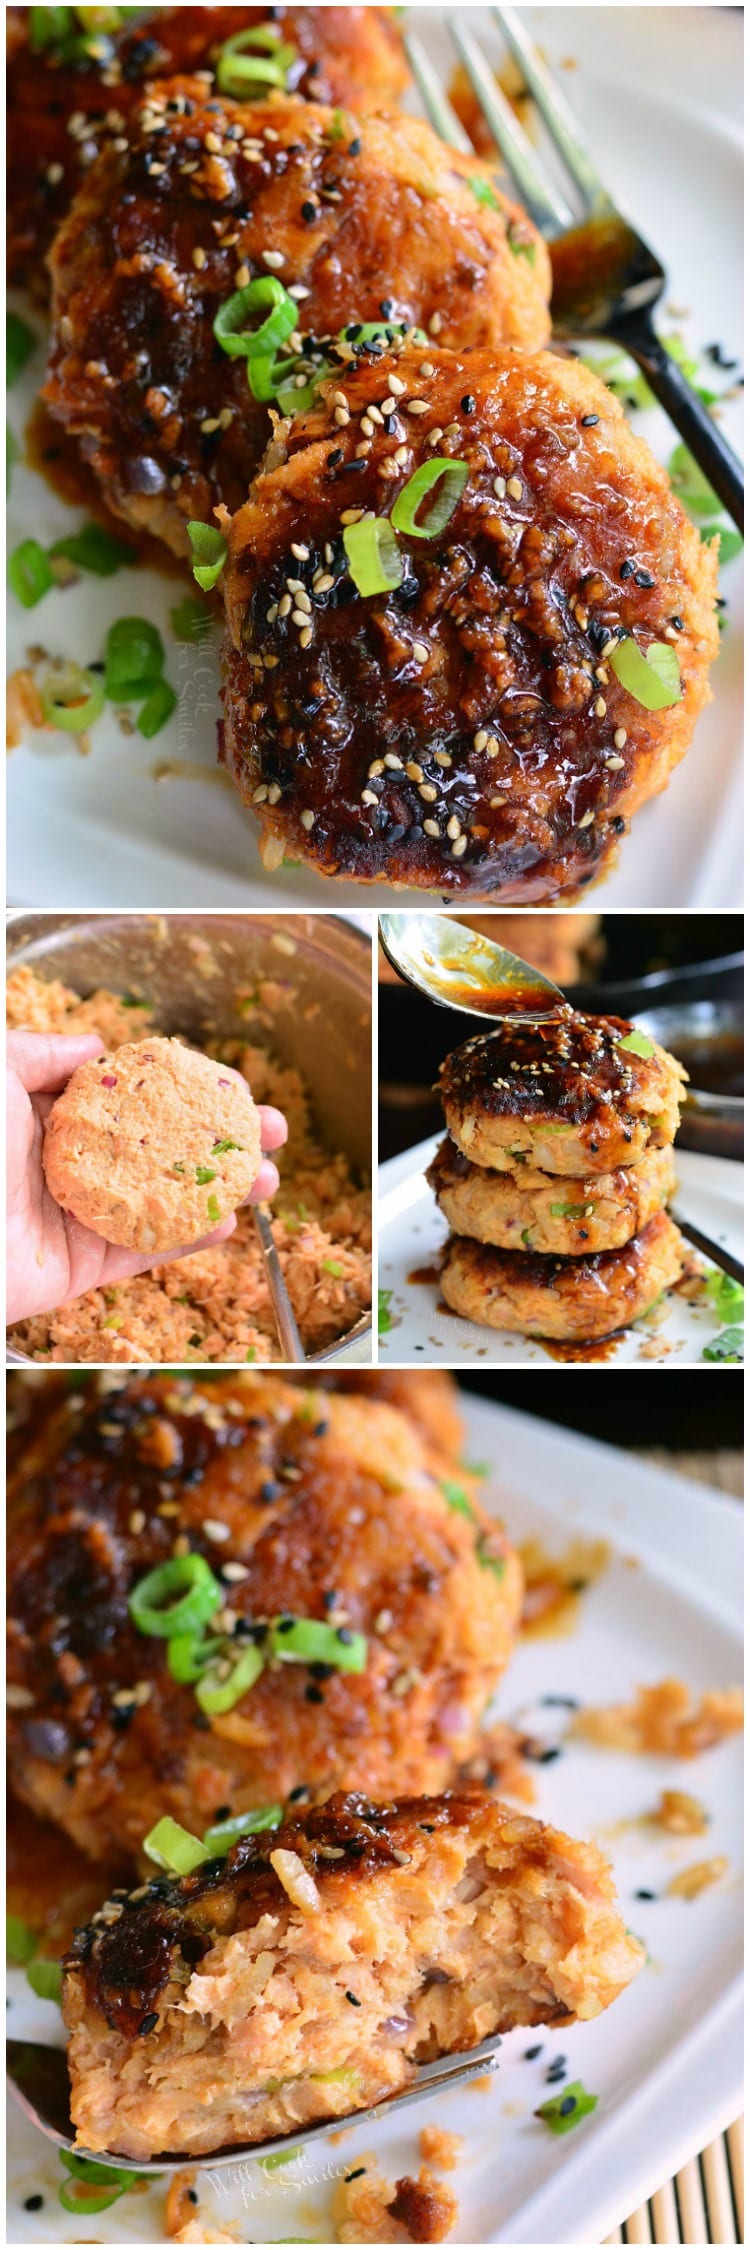 Teriyaki Rice and Salmon Patties. These outstanding salmon patties are soft, flaky, and packed with flavors. They are made with rice and teriyaki flavors inside as well as an easy teriyaki sauce for dipping.